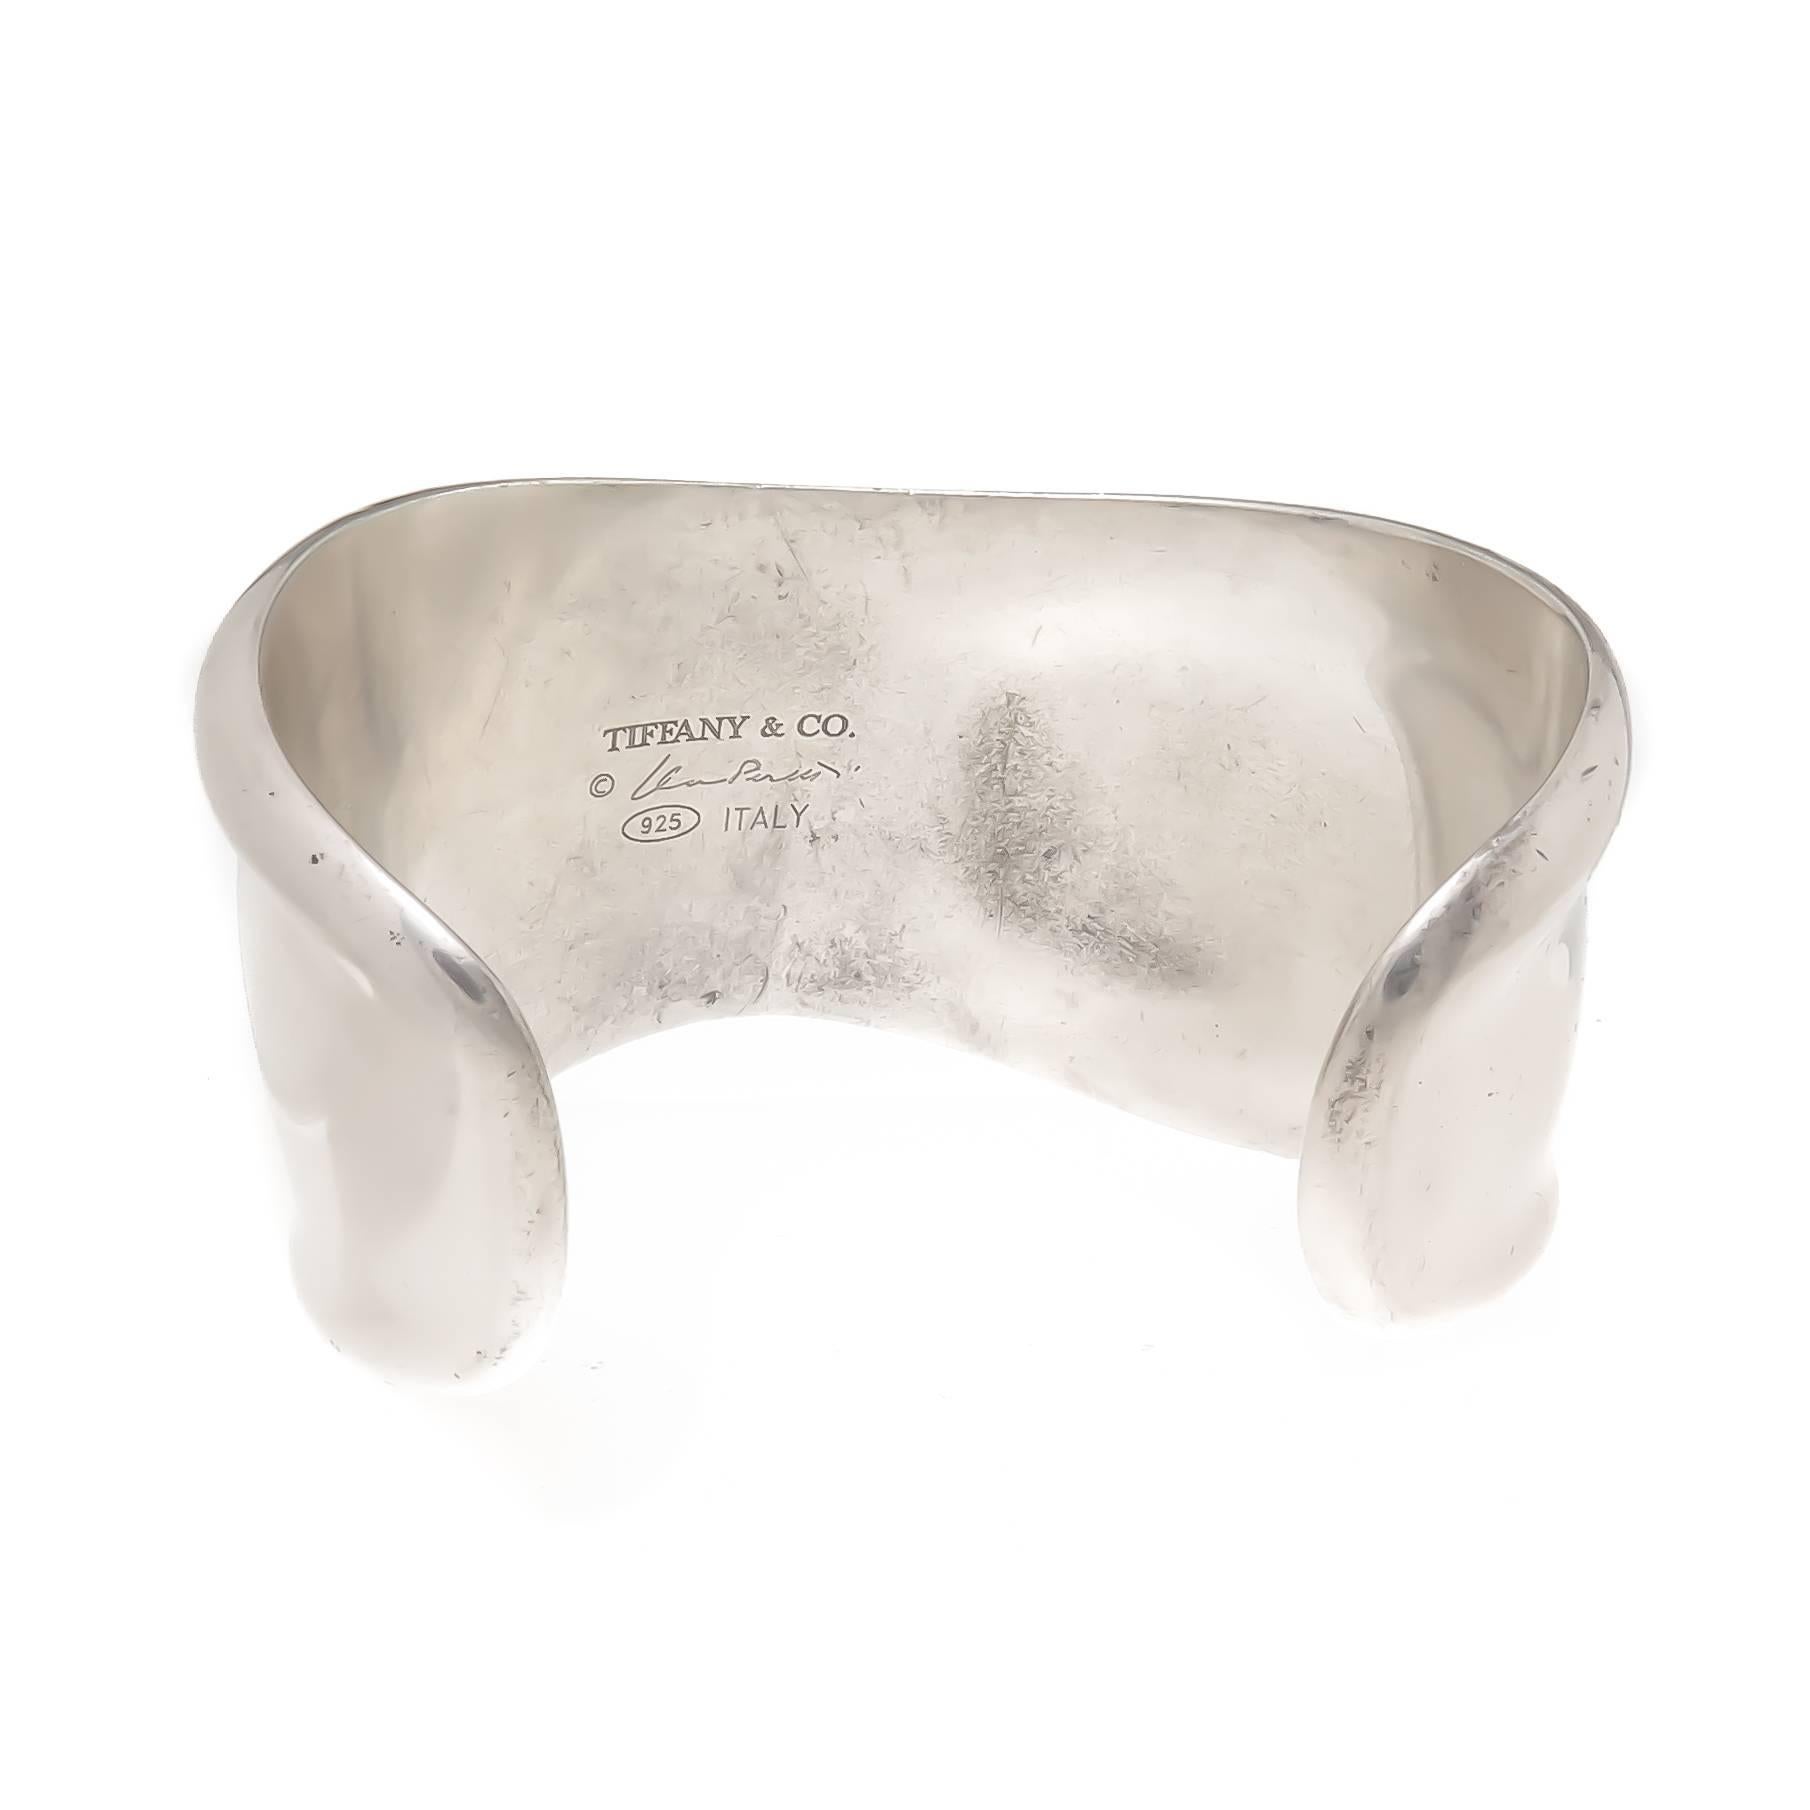 Circa 2000 Elsa Peretti for Tiffany & Co., Sterling Silver Bone Cuff Bracelet. Measuring 1 1/2 inch at its widest point, an opening of 1 1/8 inch and an inside measurement of approximately 6 1/8 inch. This is the medium size bracelet from the Bone